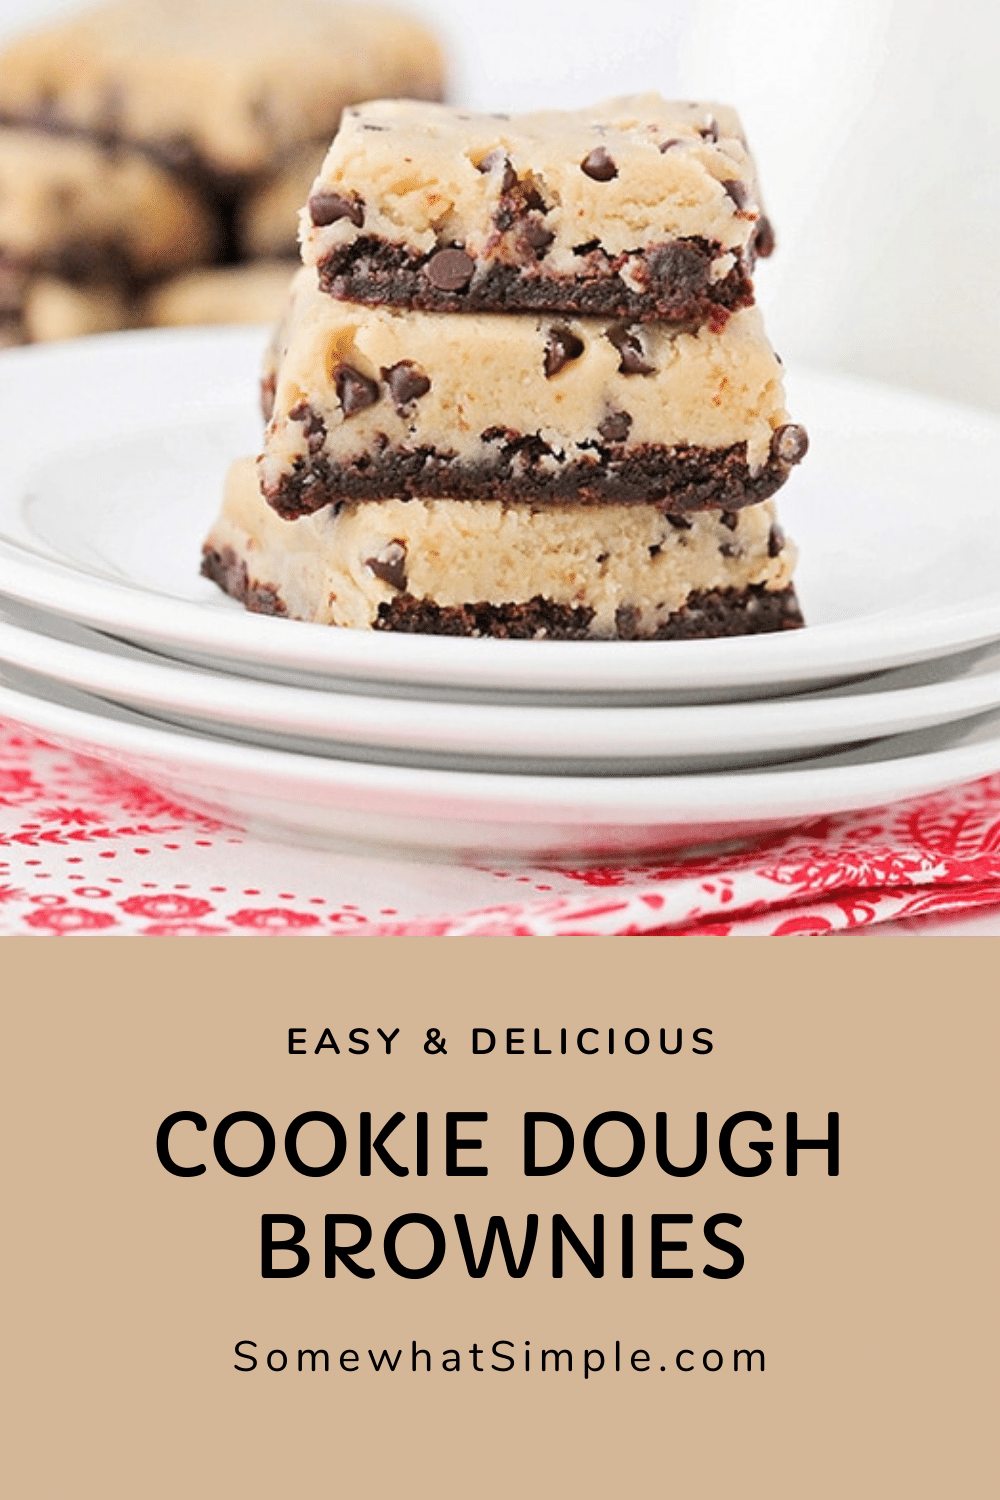 These cookie dough brownies are so rich and decadent! A fudgy chocolate brownie layer topped with eggless cookie dough, for an unforgettable dessert! They are the perfect combination of my two favorite treats; brownies and chocolate chip cookies. via @somewhatsimple